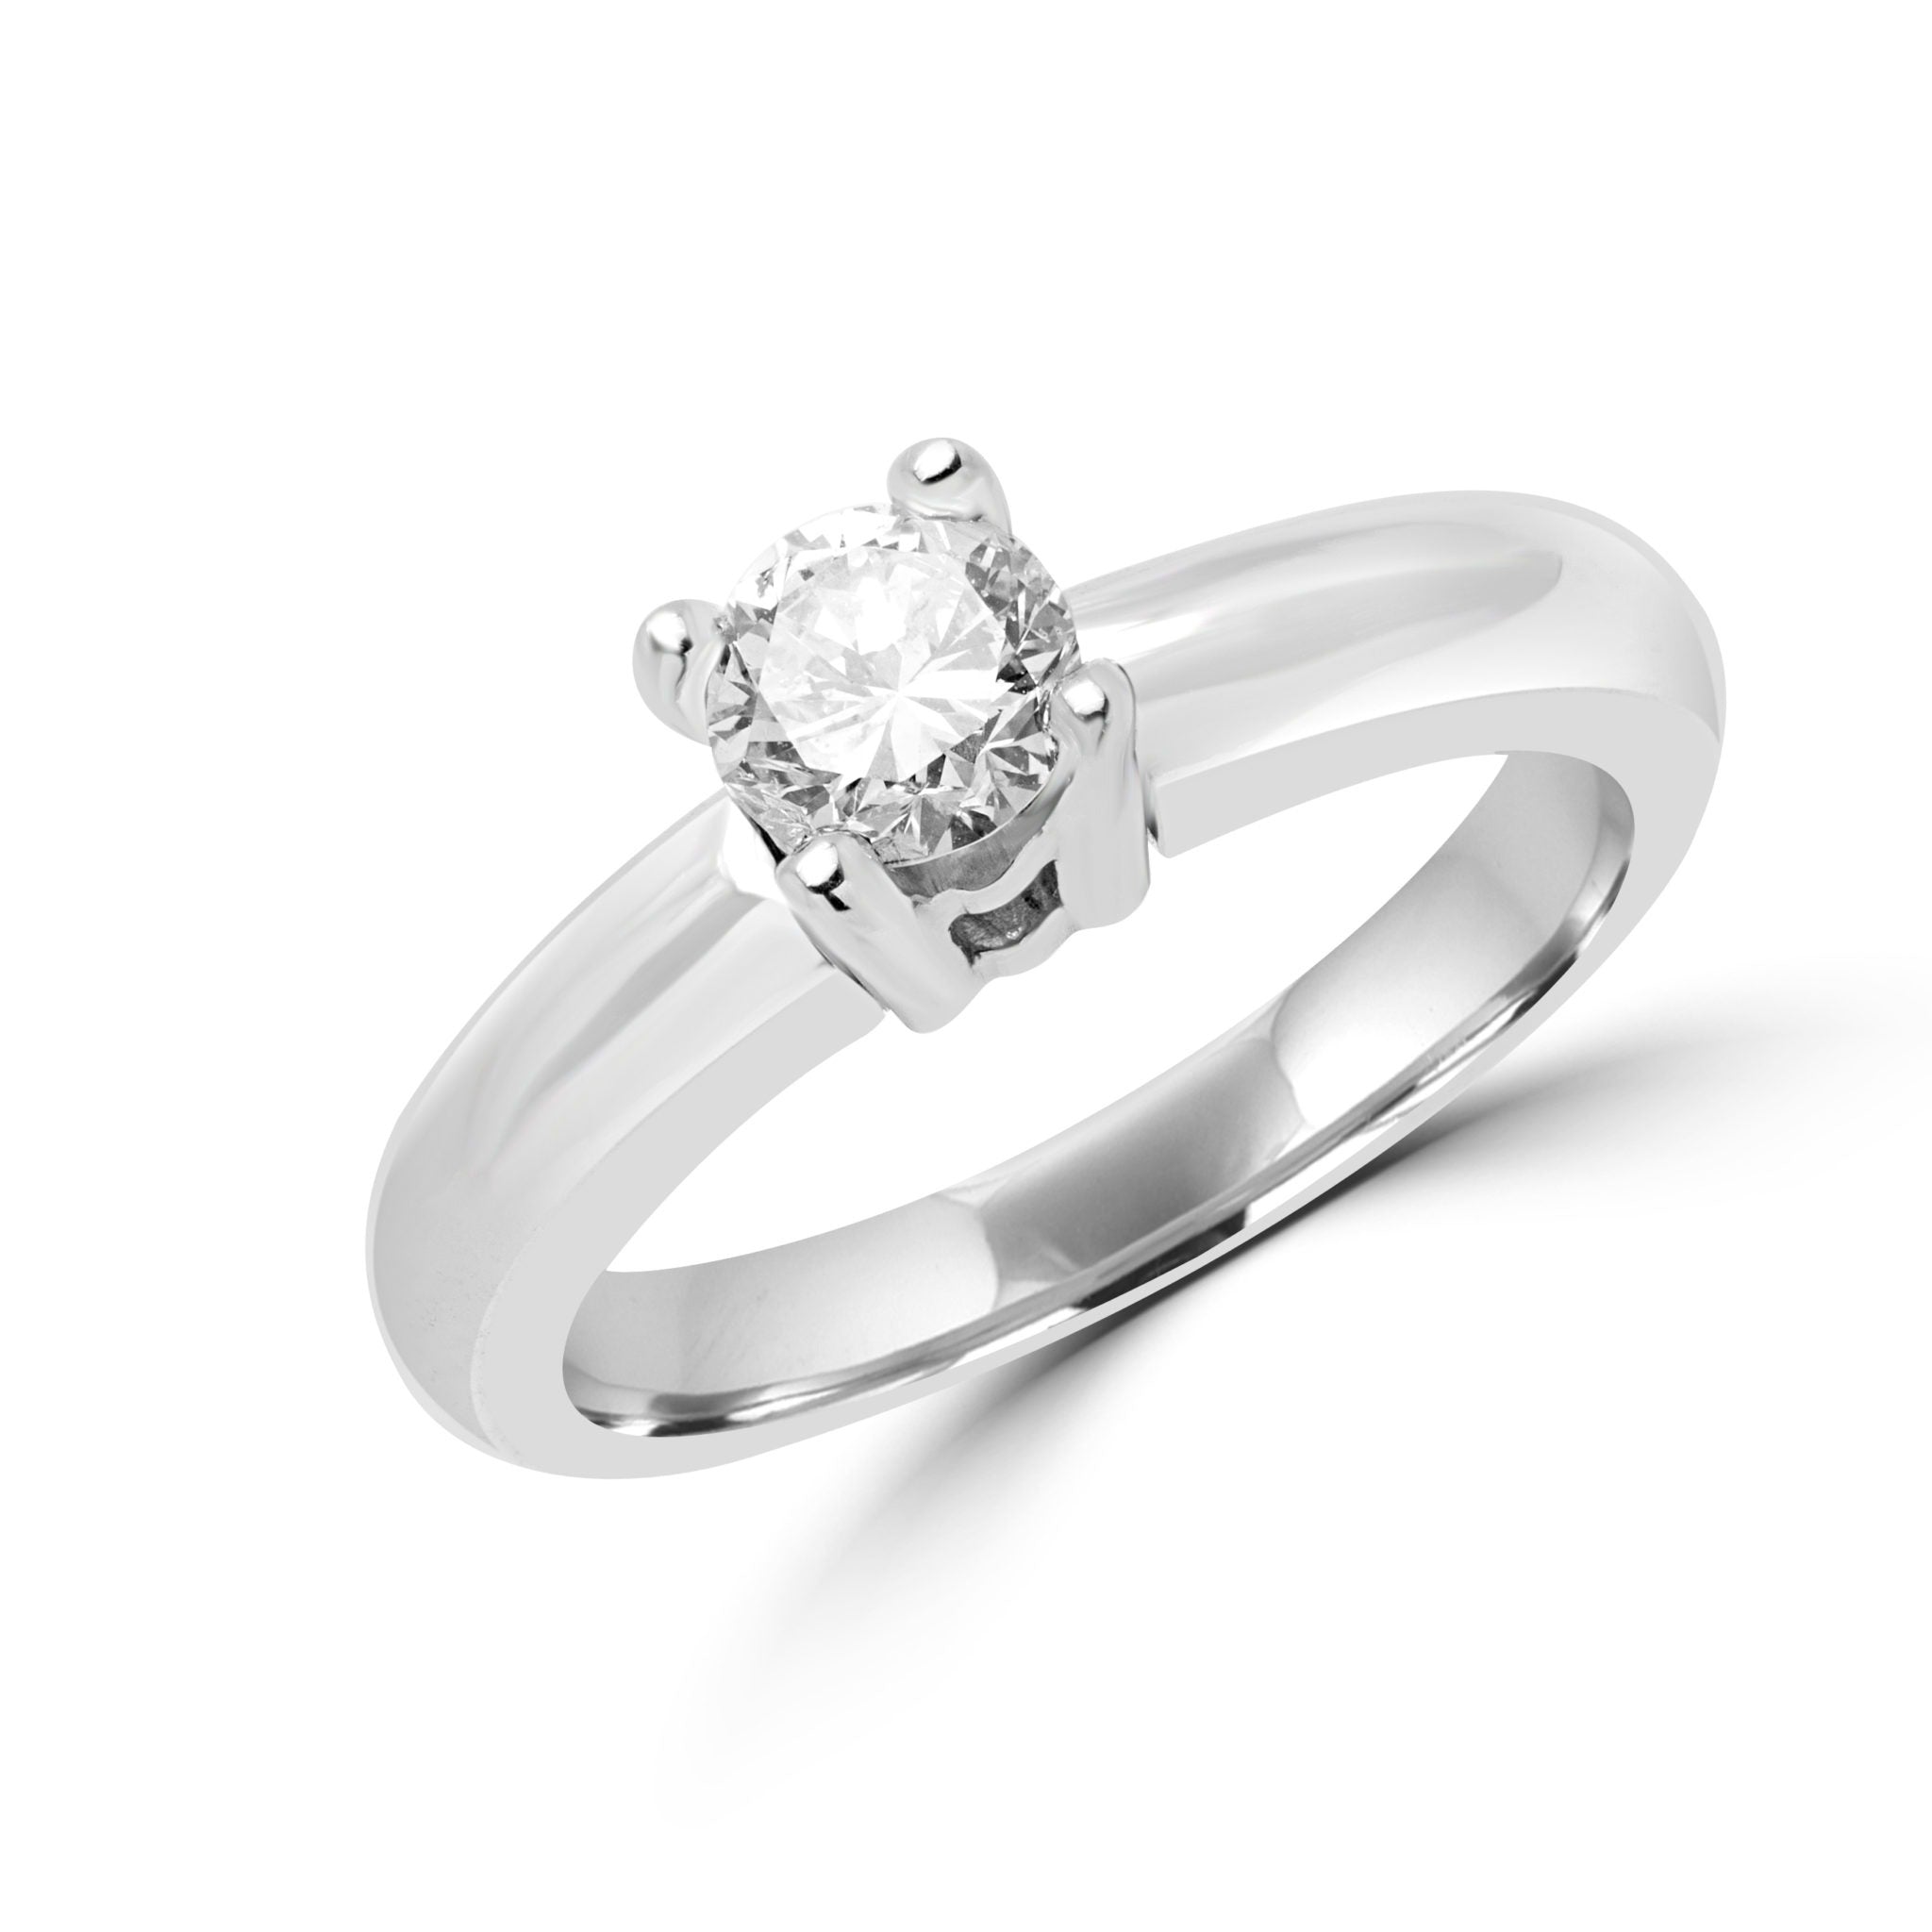 Solitaire round diamond engagement ring 0.54 (ctw) 14k white gold